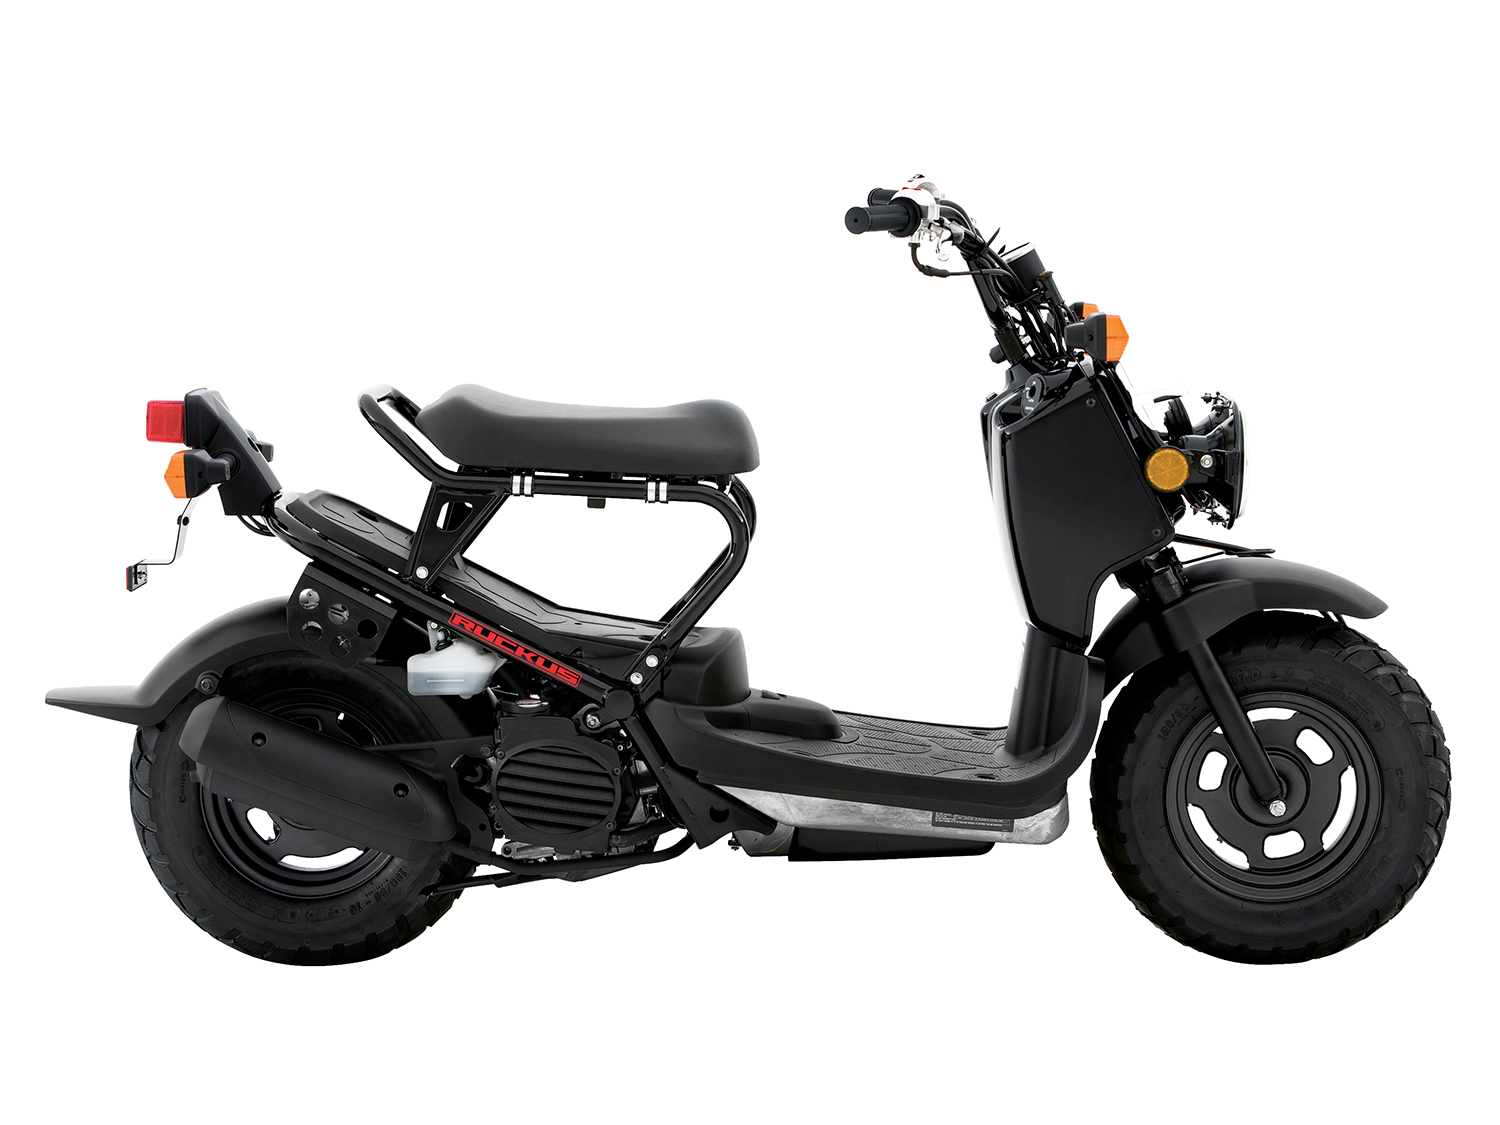 2020 Scooters Look | Motorcyclist